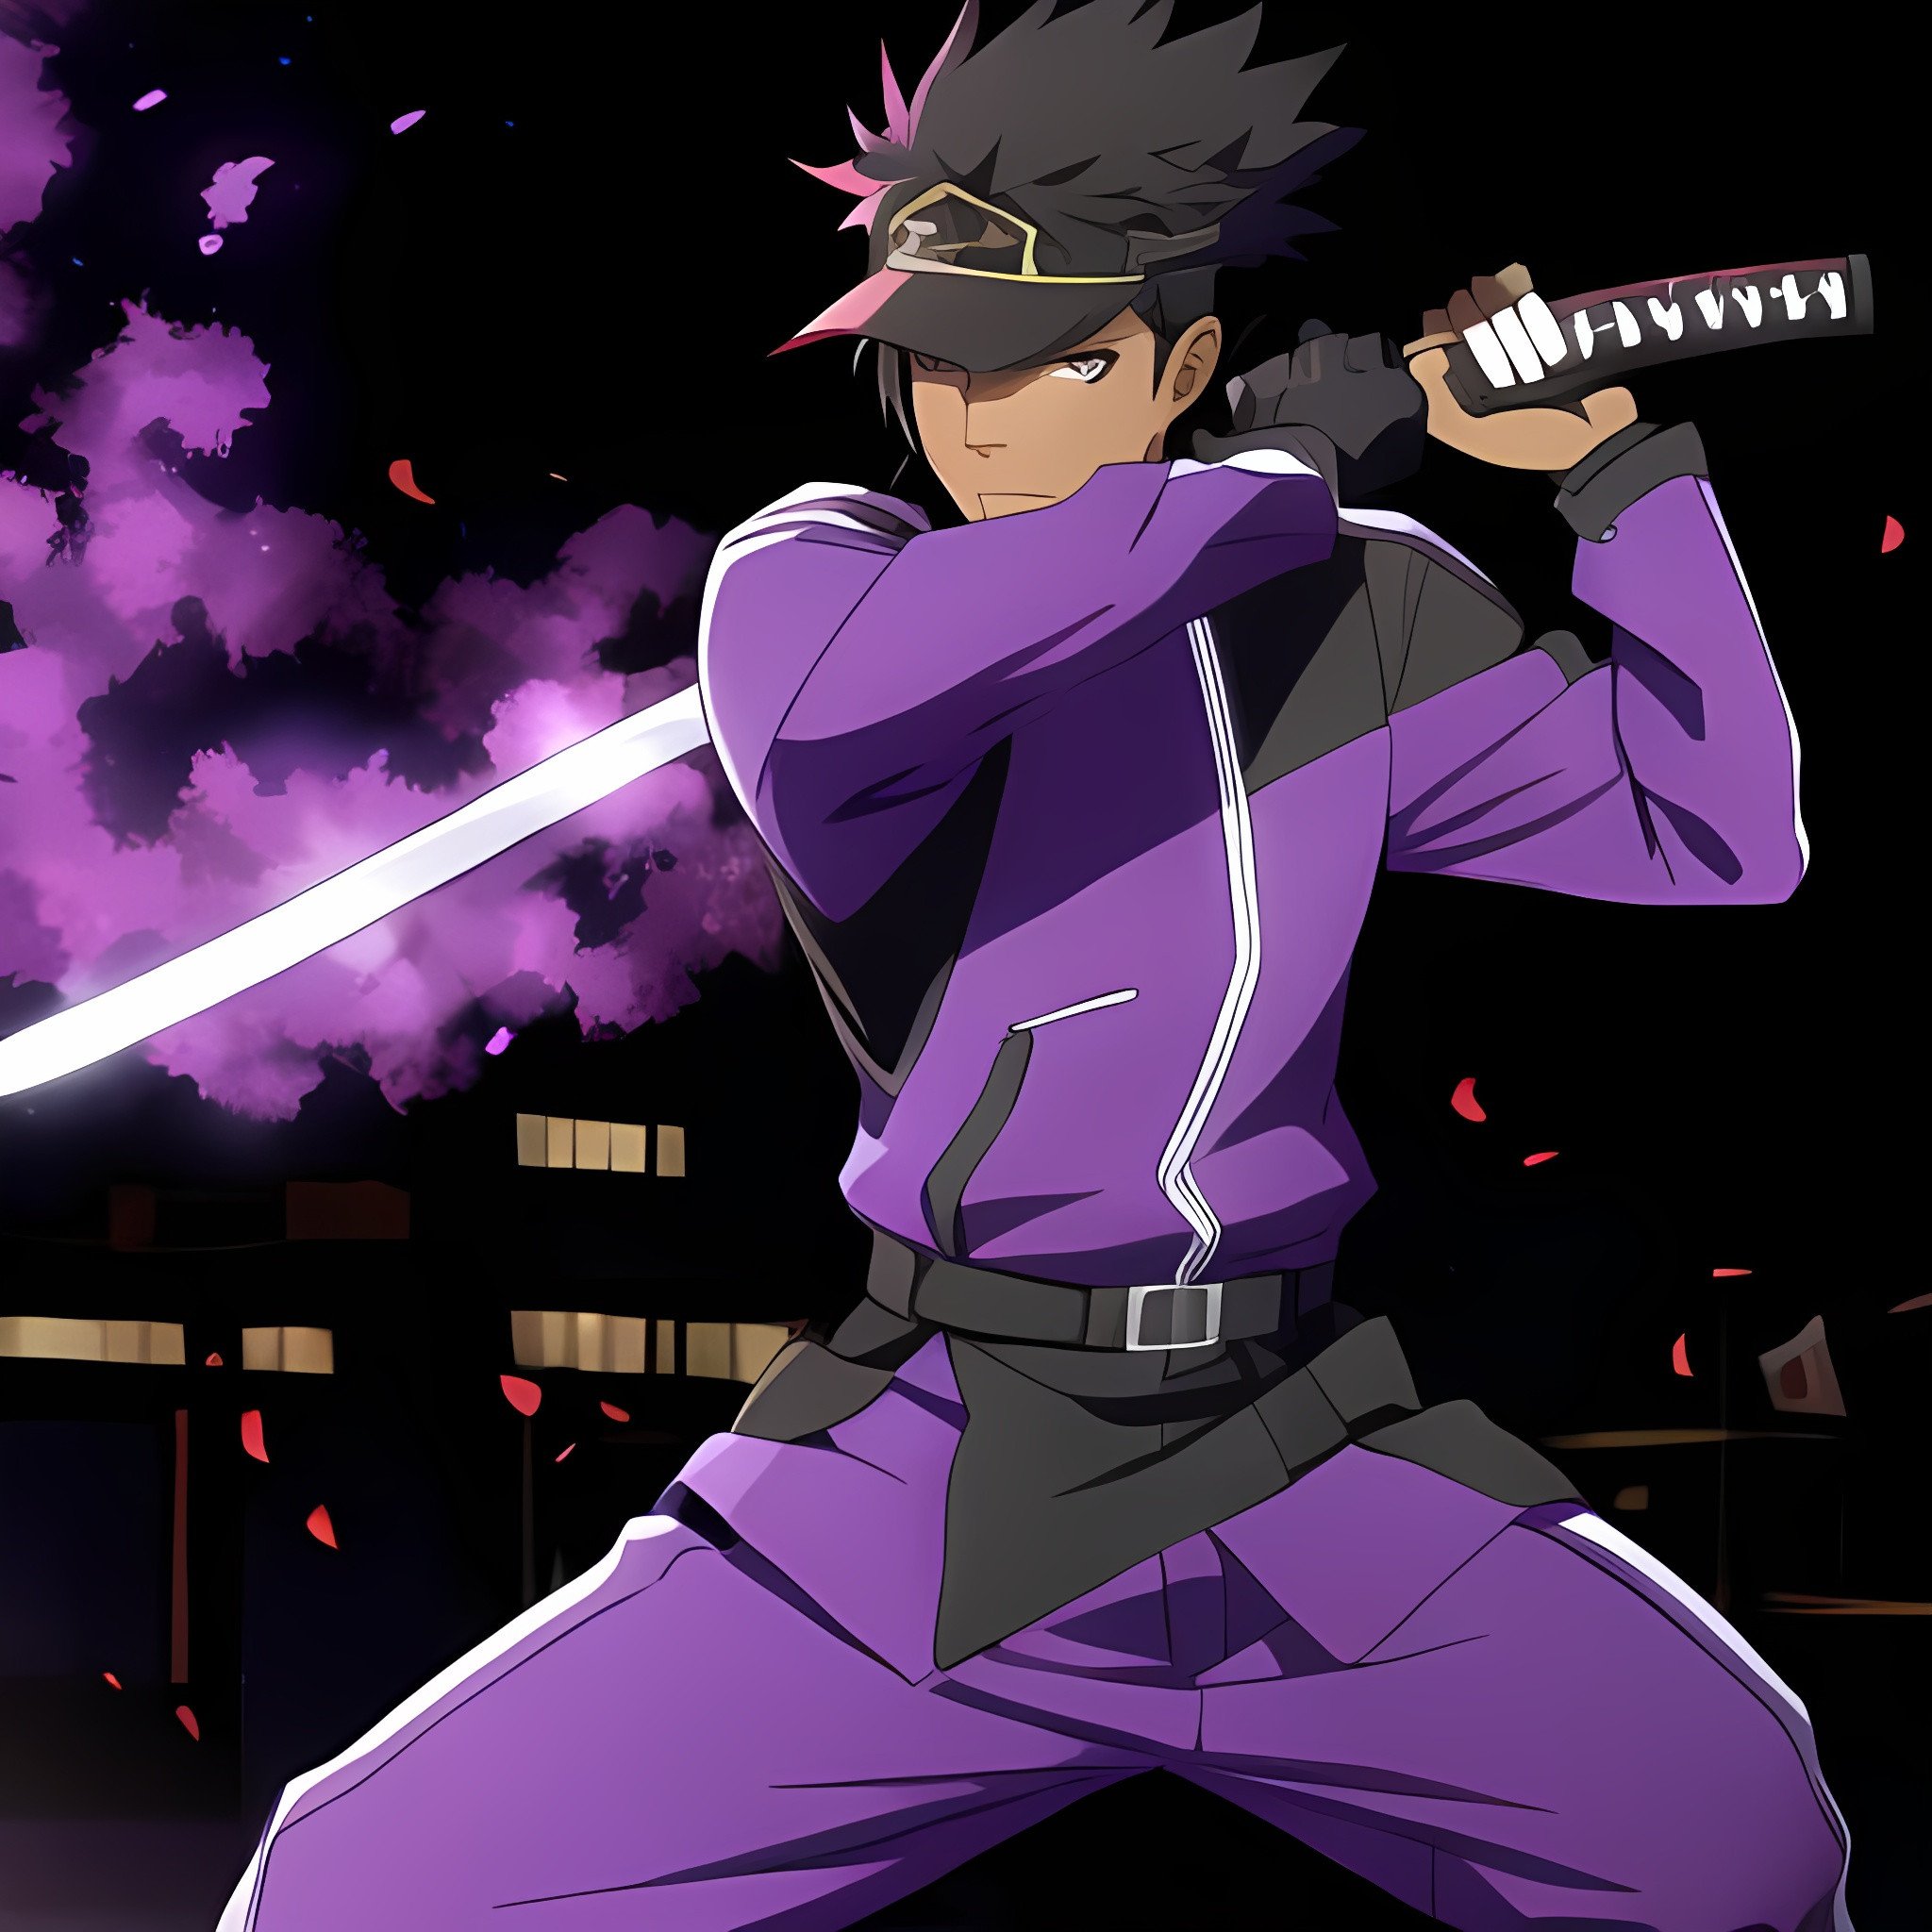 Male Black anime character with purple powers and me